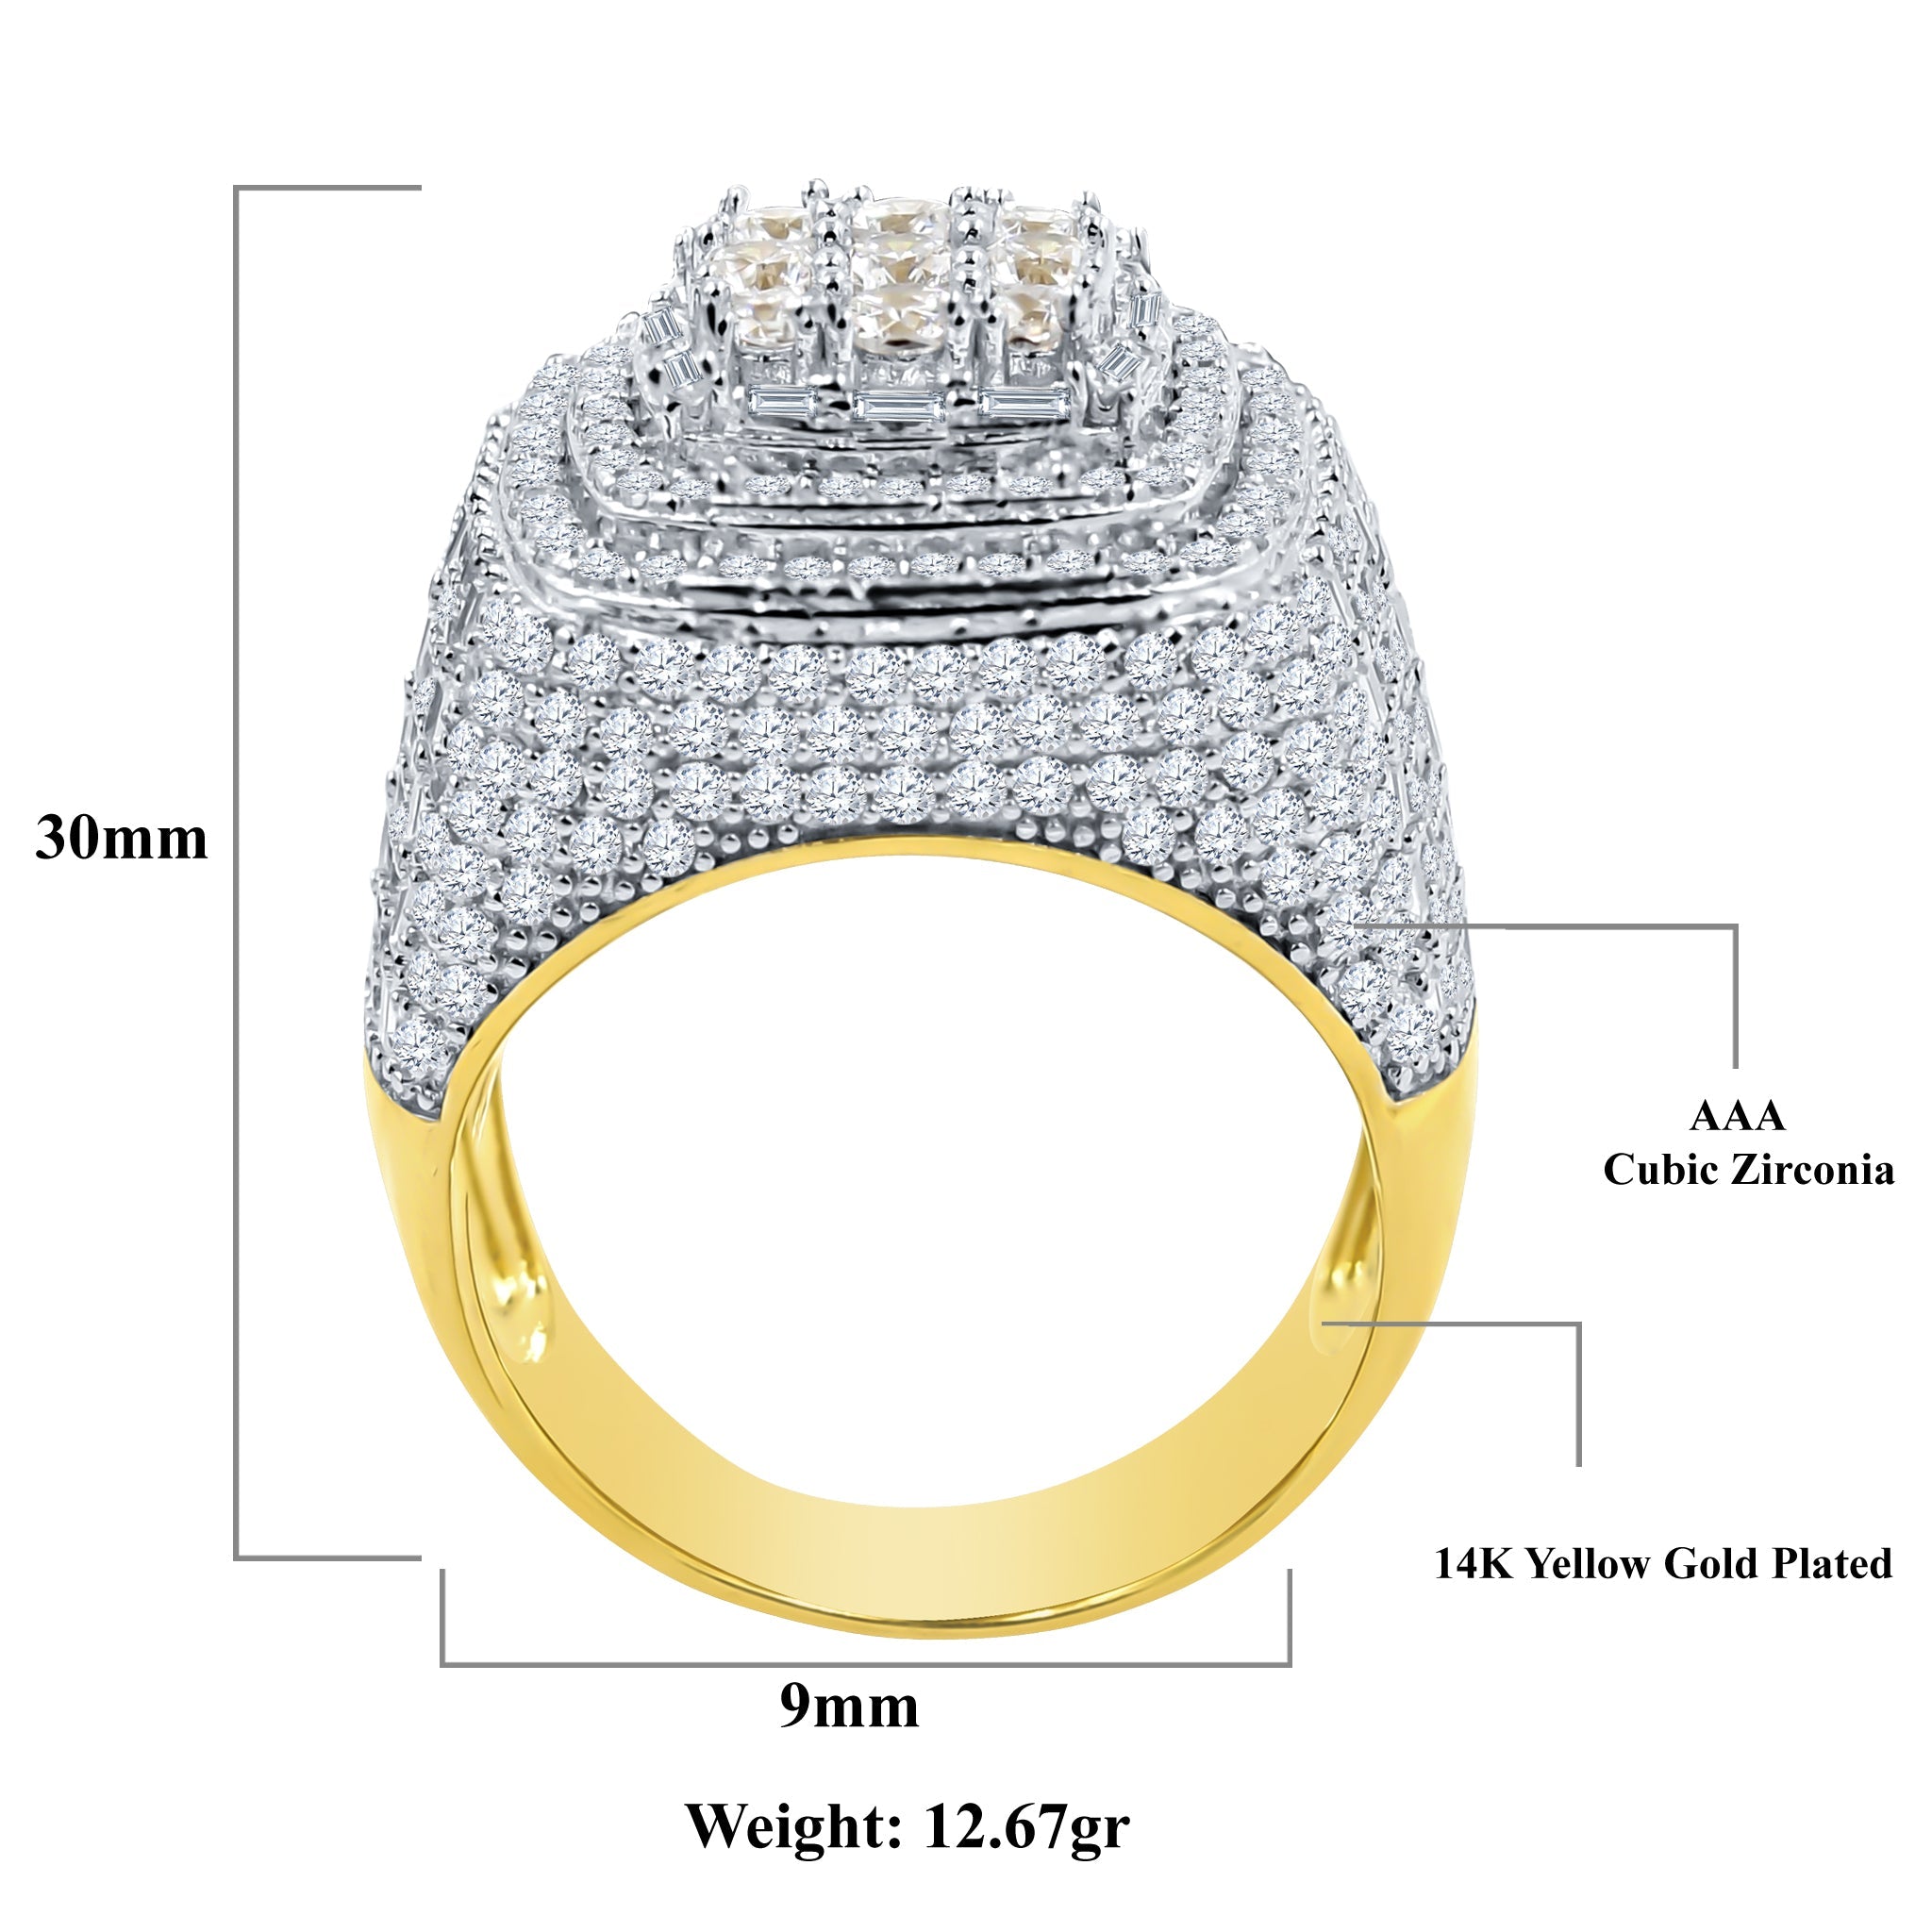 STARDUST 925 SILVER RING CZ  | 9216272